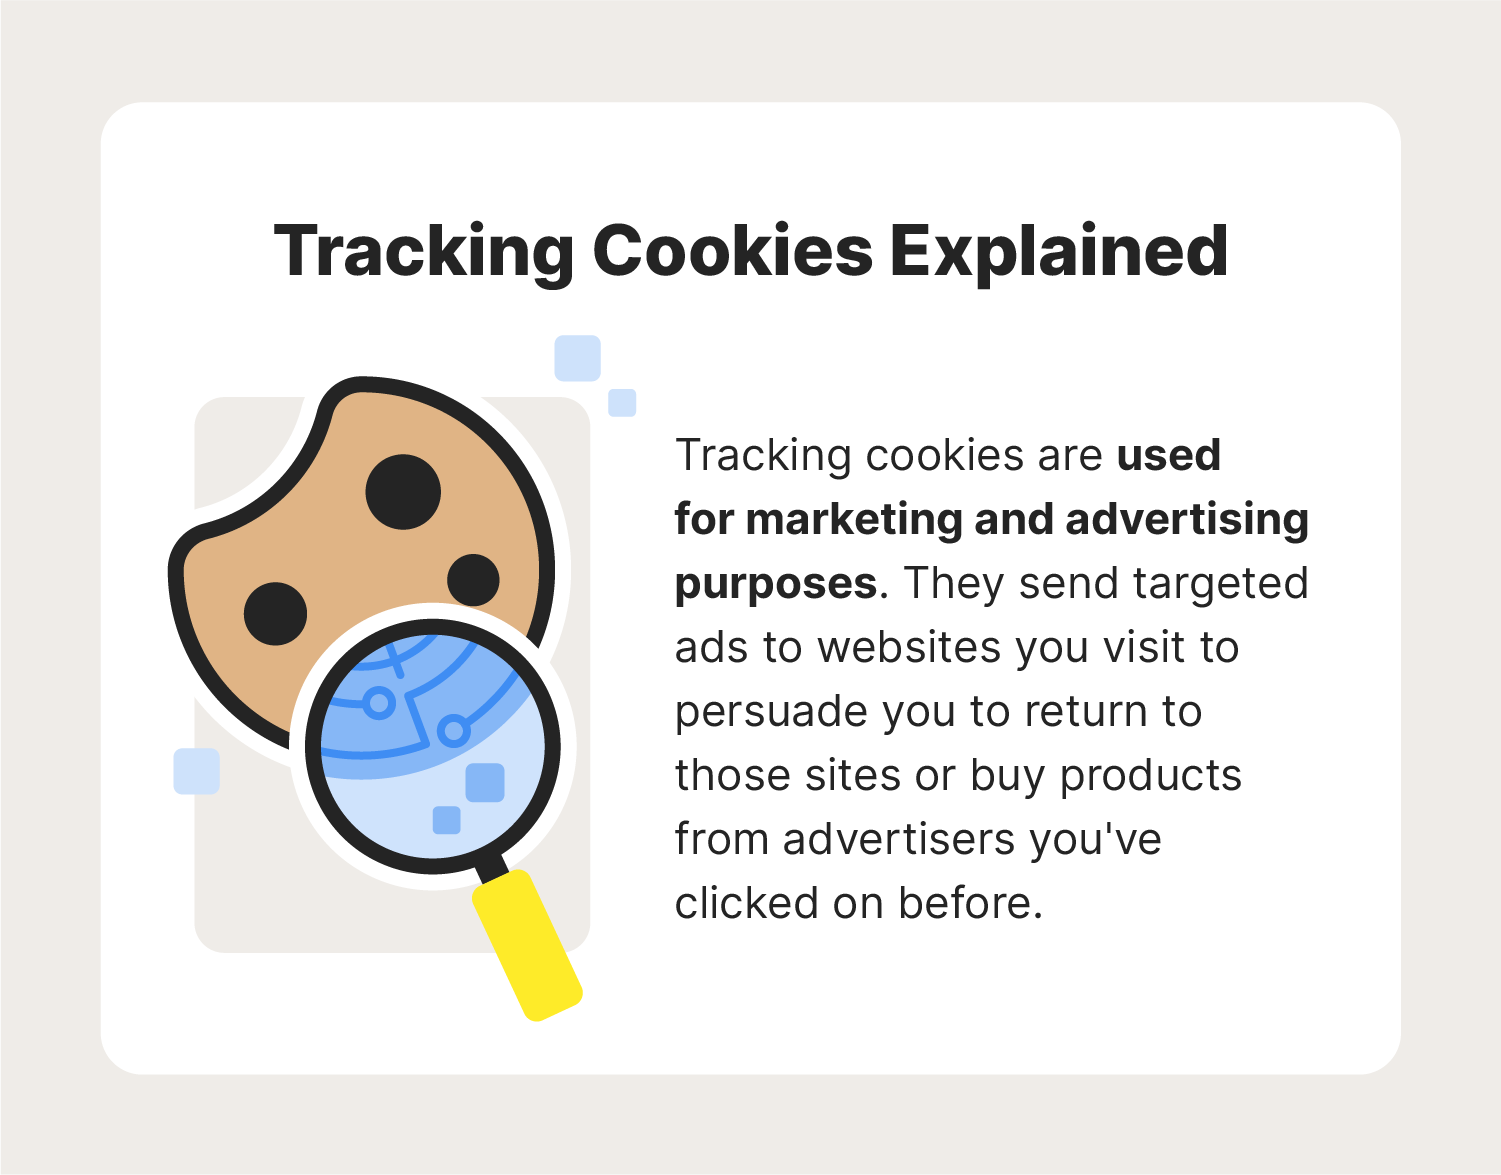 A graphic showcases how tracking cookies work.